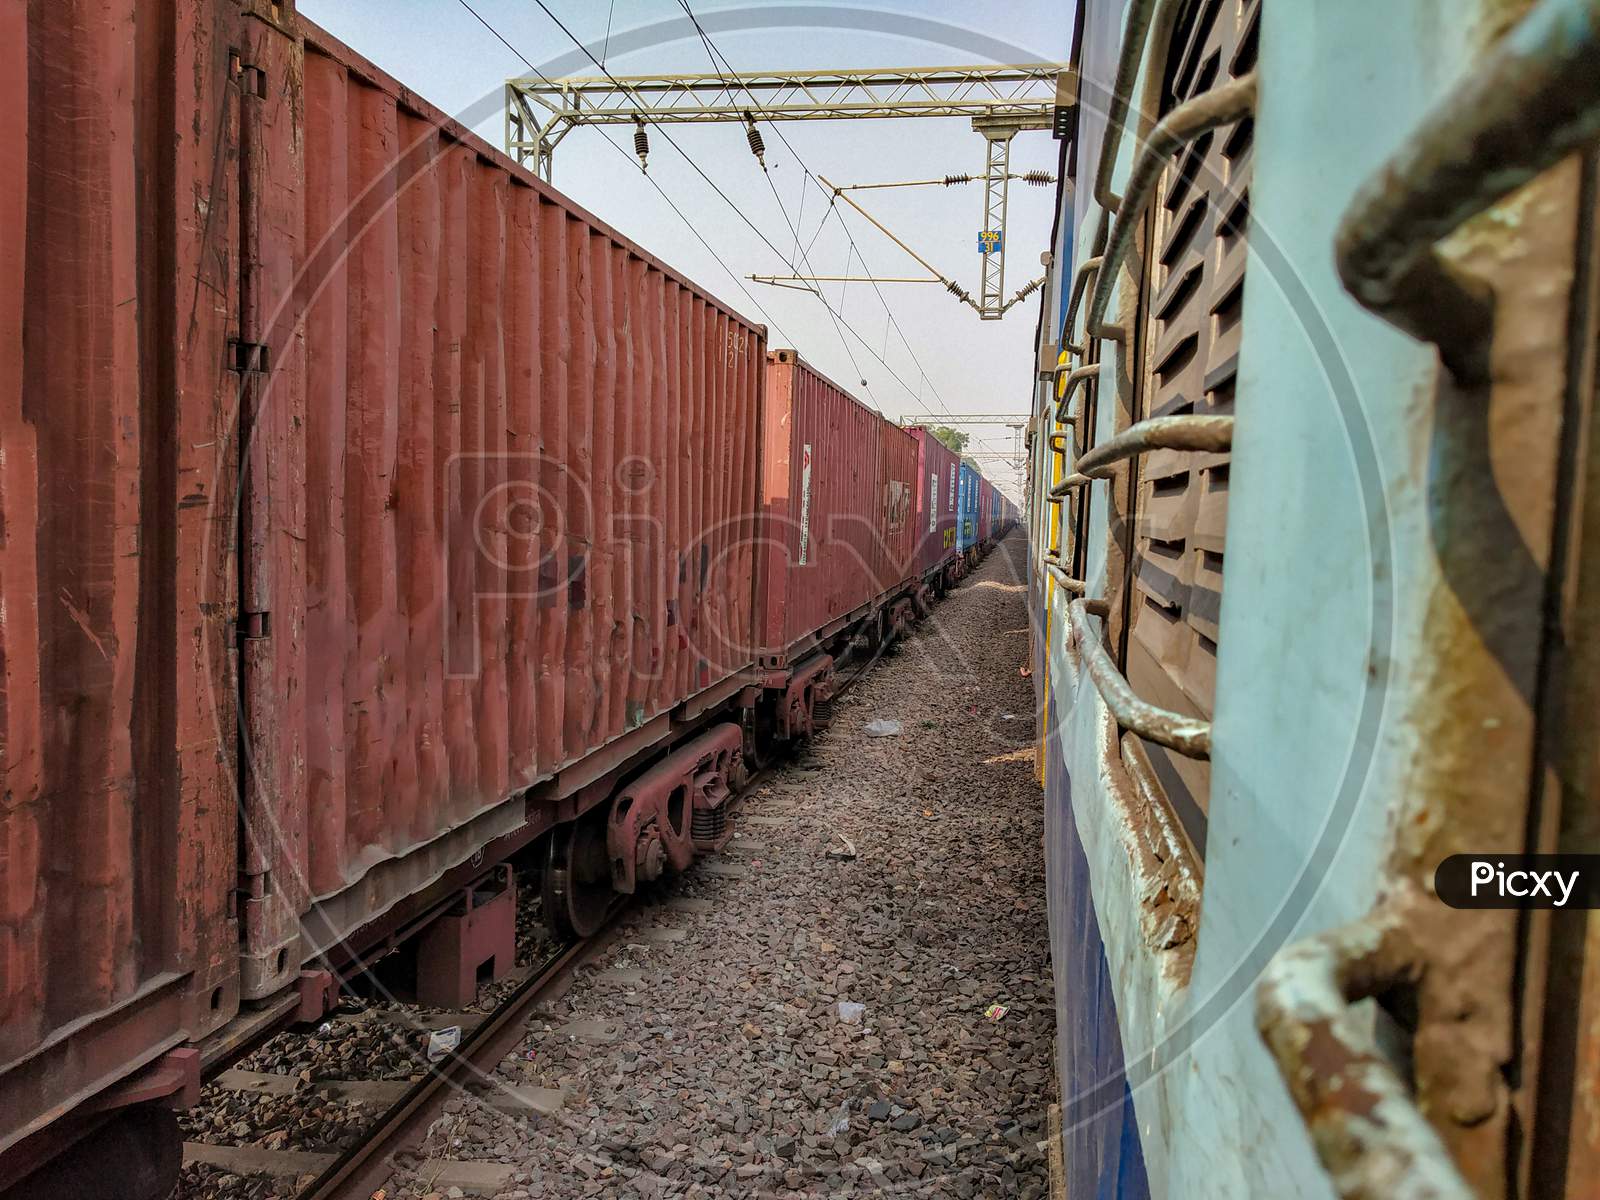 Between the Indian railway cargo train and passenger